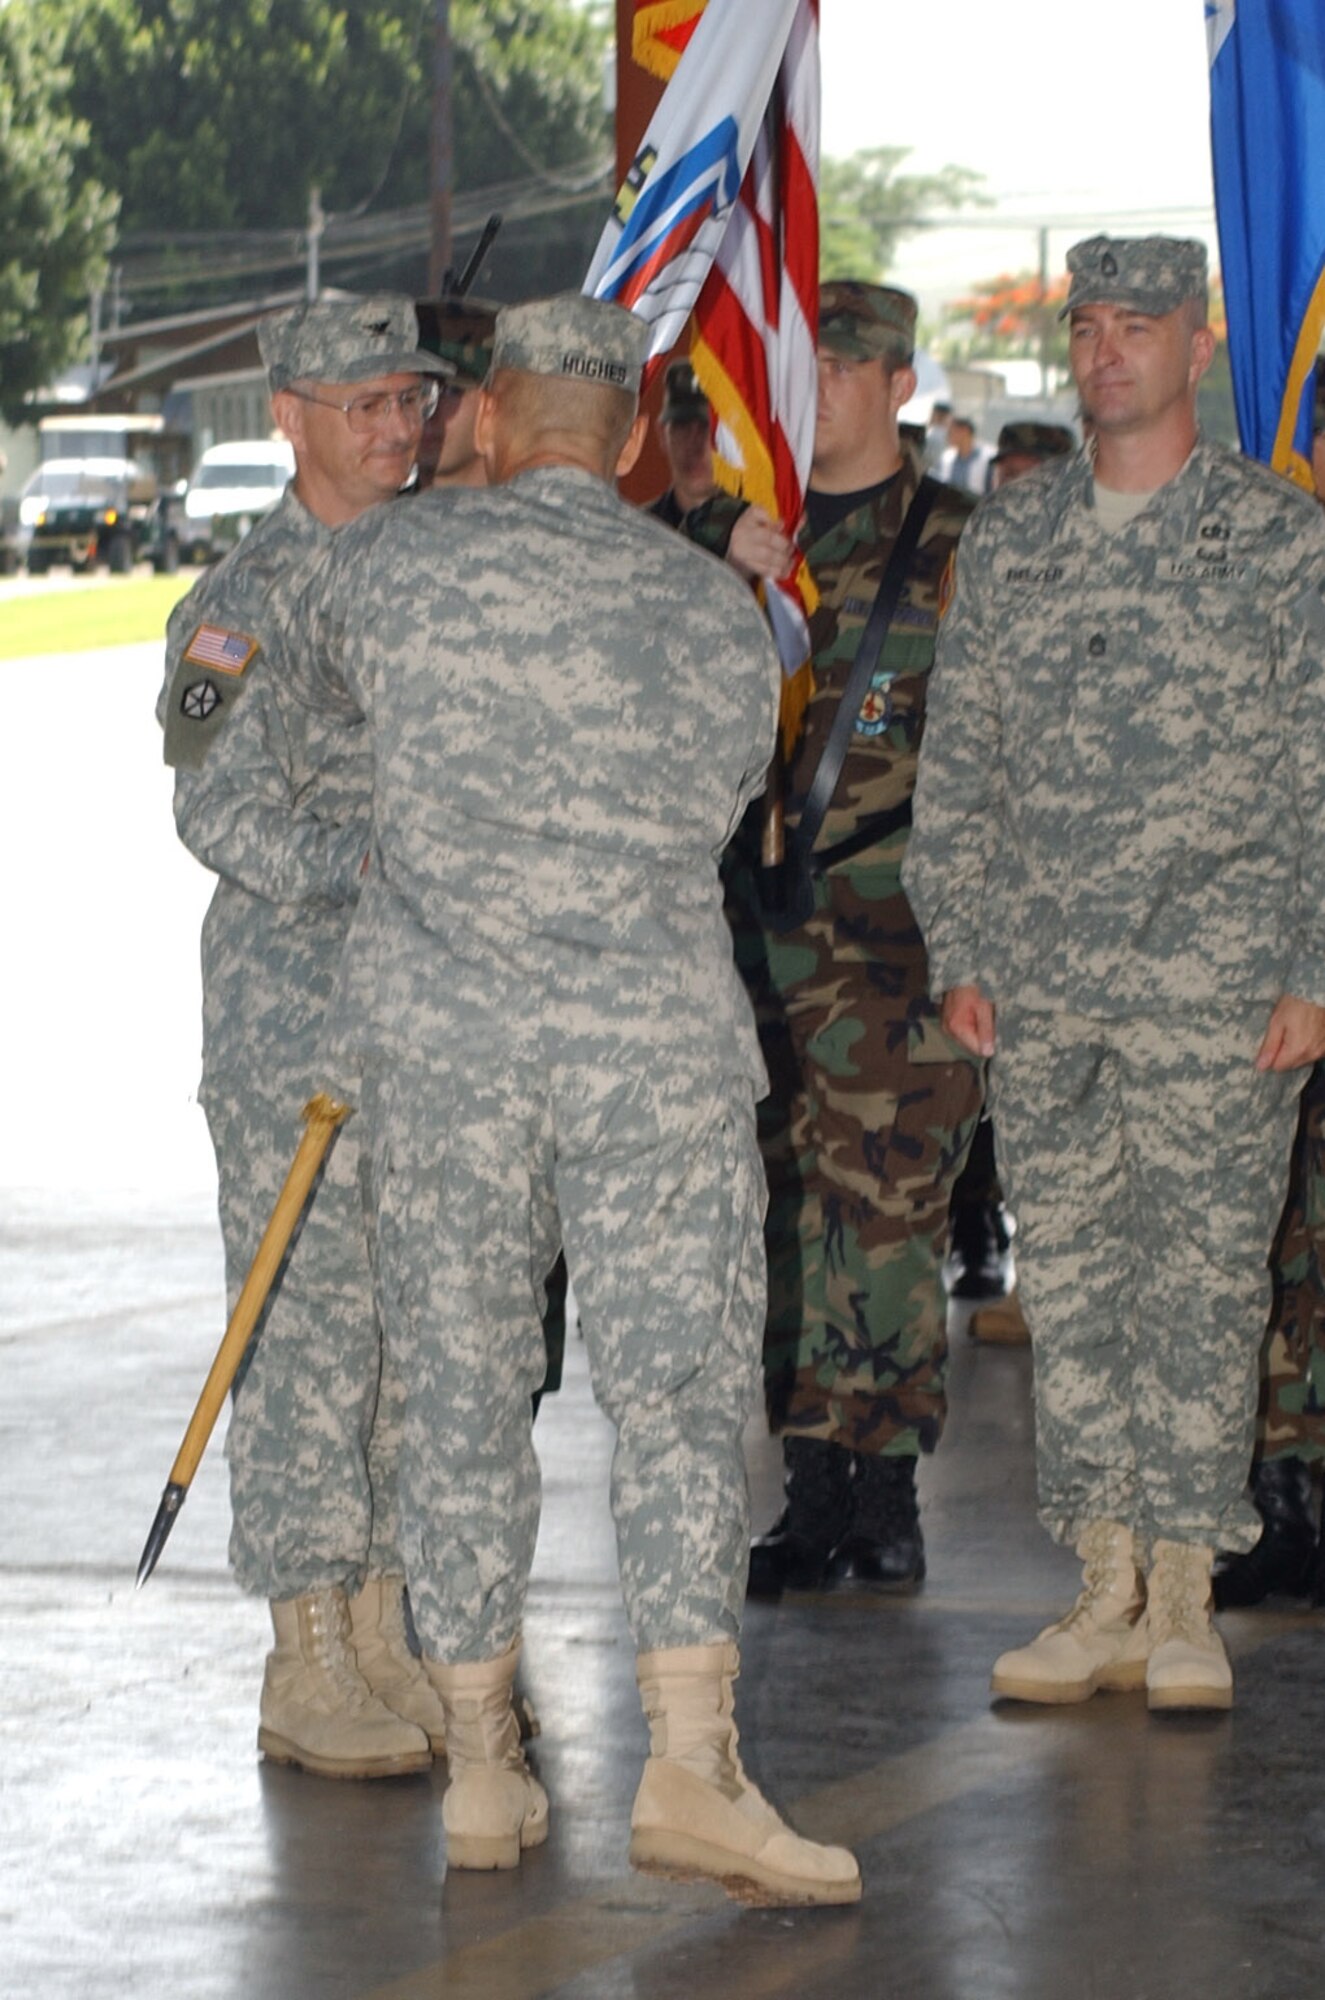 Army Col. Michael Sigmon, left, assumes command of the Joint Task Force-Bravo Medical Element by taking the MEDEL guidon from Col. Christopher Hughes, JTF-B commander, June 25 at the Soto Cano Air Base Fire Department. The MEDEL mission is to provide health service support and mobile surgical teams to U.S. Forces deployed in the U.S. Southern Command area of responsibility and more than 560 airmen and soldiers at Soto Cano Air Base; to conduct medical readiness training exercises (MEDRETES); and to serve as liaison to Honduran Ministries of Health. U.S. Air Force photo by Senior Airman Shaun Emery.